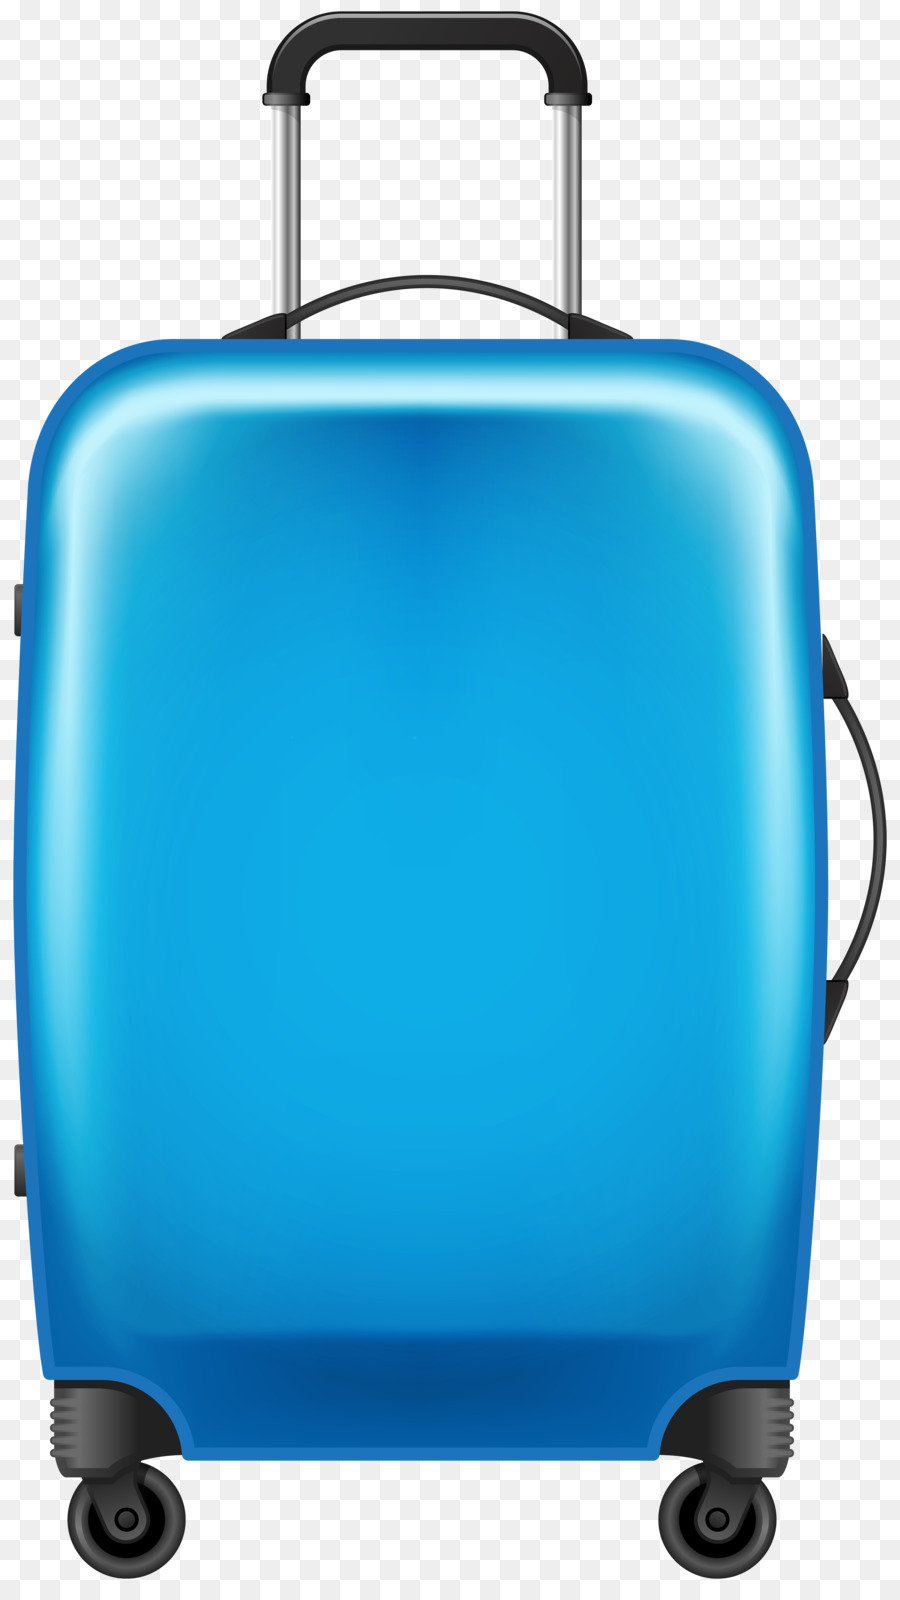 Suitcase Baggage Trolley Bag tag Travel - suitcase png download - 4527*8000 - Free Transparent Suitcase png Download.